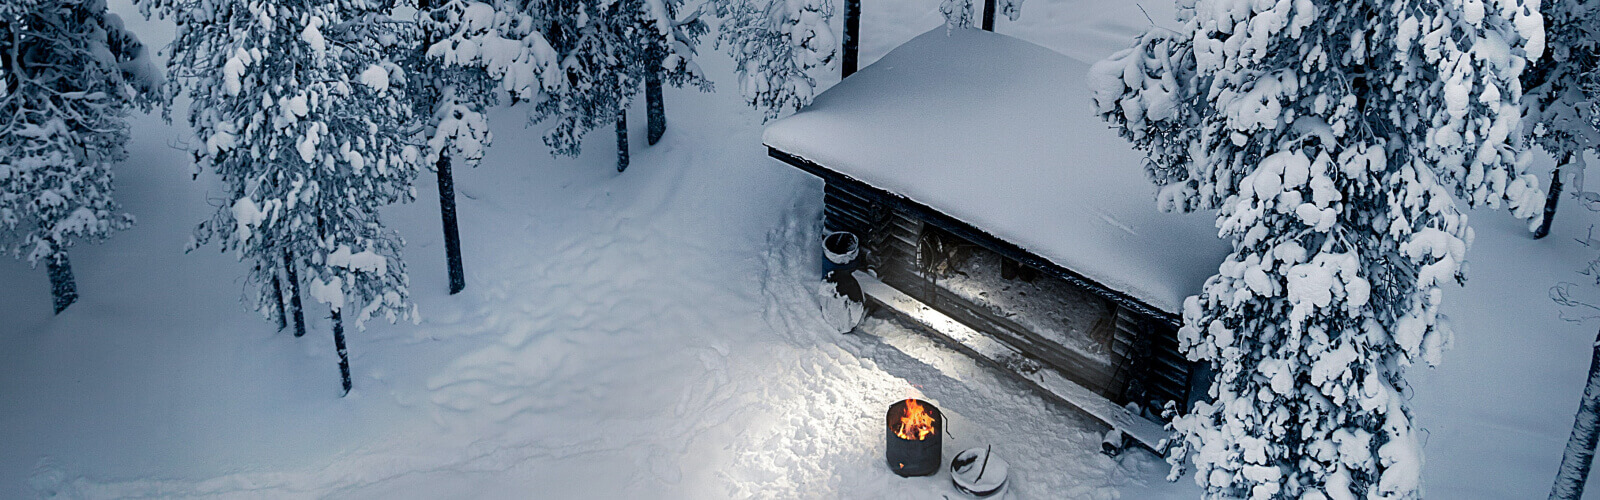 Cozy cabin with fire in a barrel behind freeze and unfreeze your credit heading